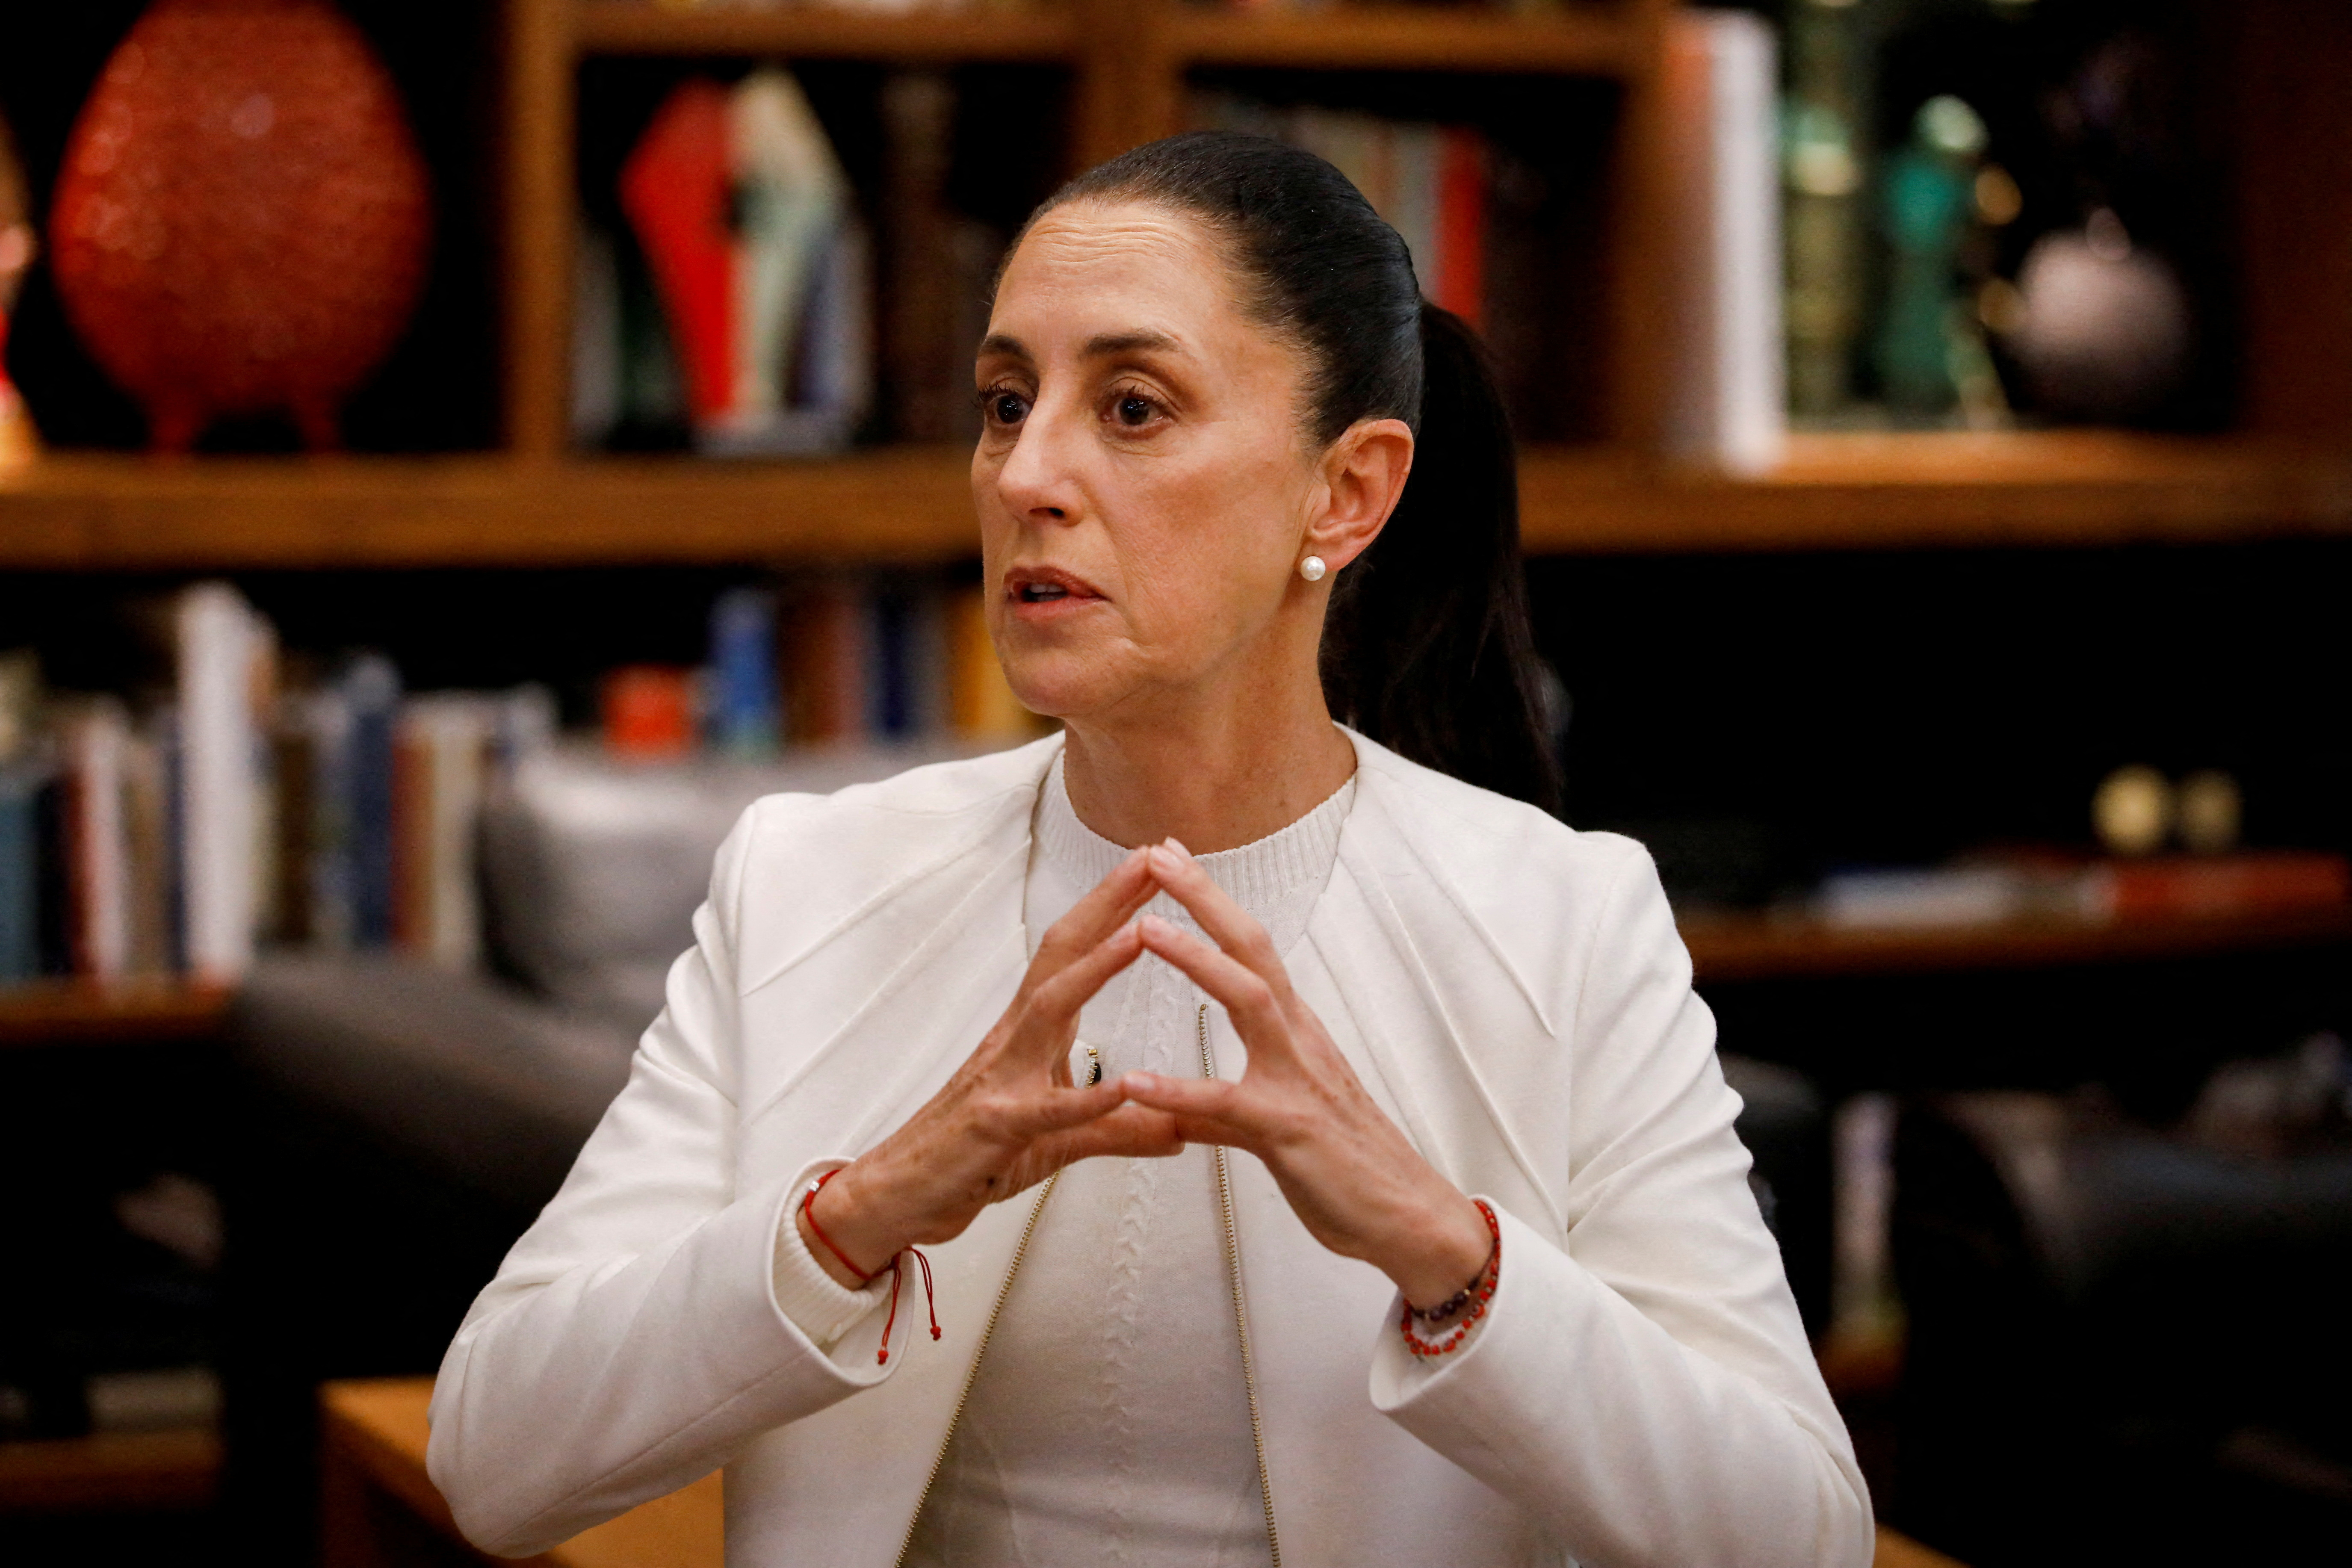 Claudia Sheinbaum pointed to the PAN as responsible for the arrival of the ultra-right in Mexico (REUTERS / Raquel Cunha)